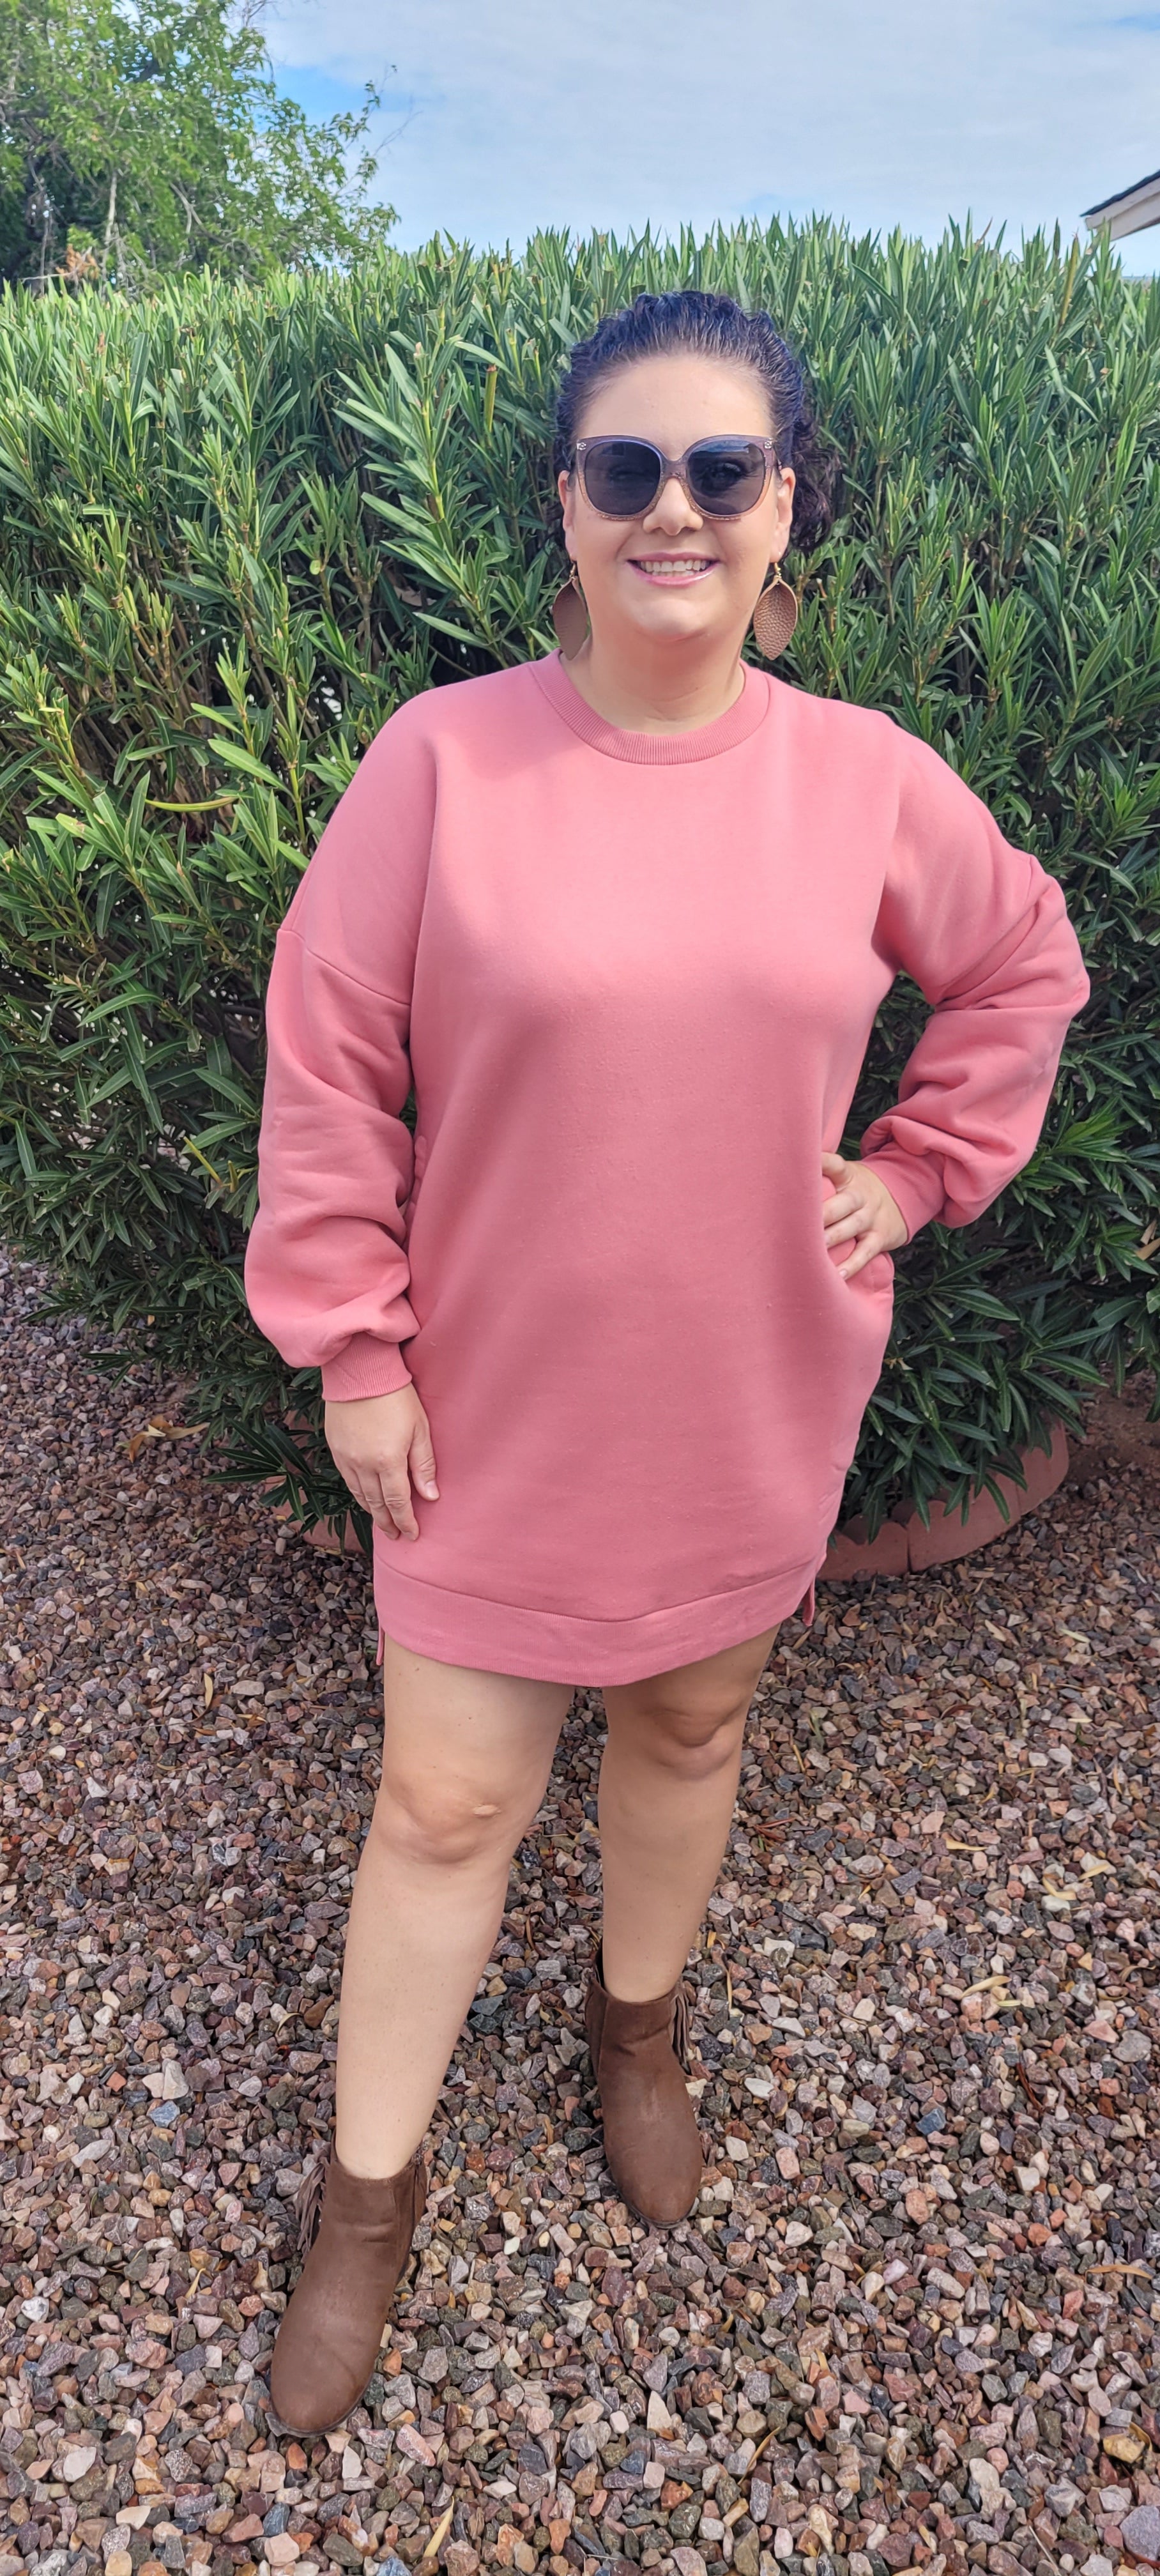 “Rock Candy” is a dusty rose sweatshirt that can be worn with leggings, jeans, or as a dress. This sweatshirt features a rounded ribbed neckline, ribbed cuffed sleeves, and two functional side pockets. It is a relaxed fit with a high-low hem. This material is very soft. Sizes small through x-large.